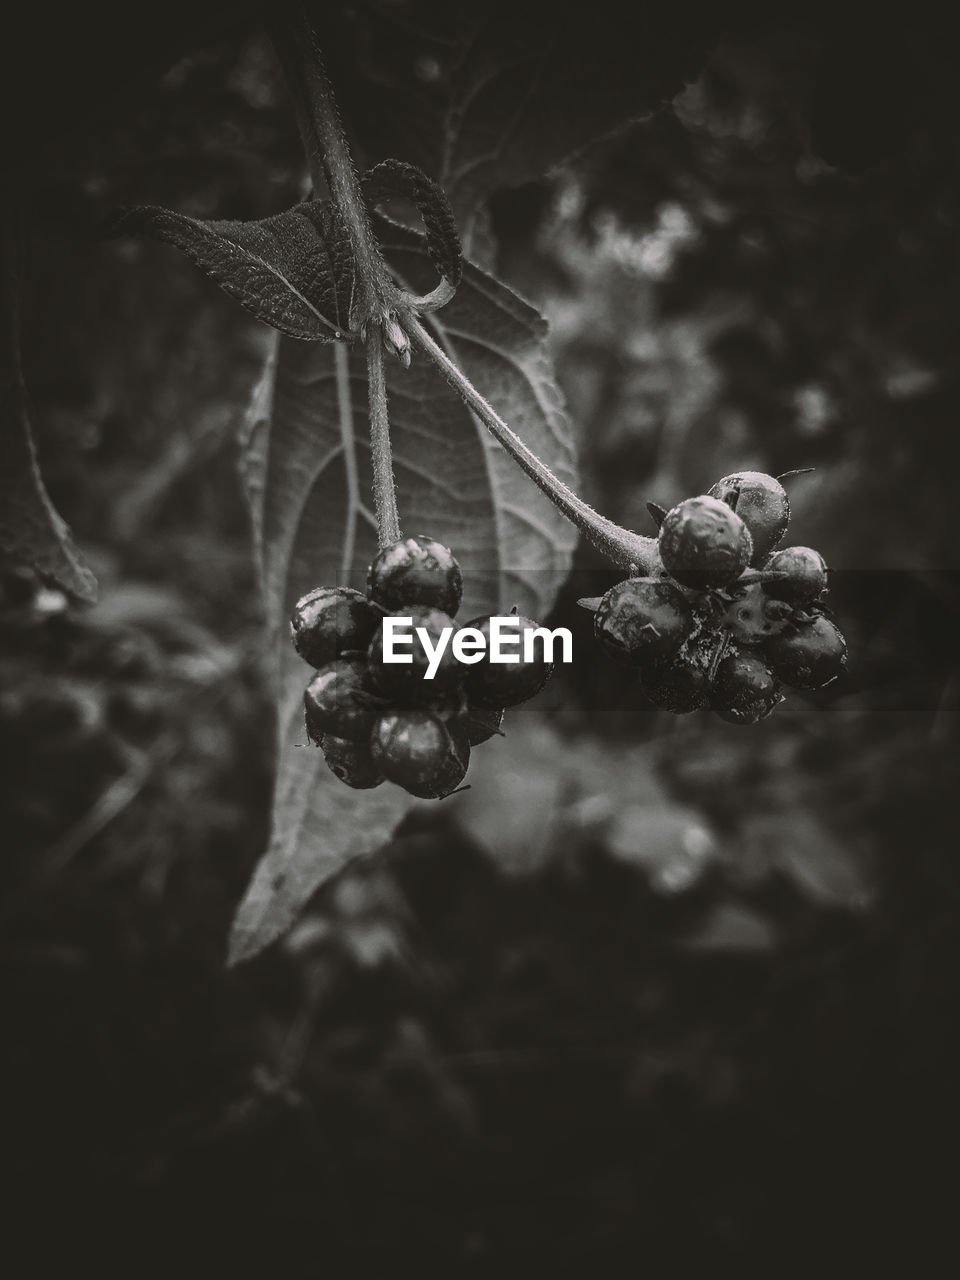 branch, leaf, black and white, plant, darkness, tree, food, food and drink, monochrome photography, macro photography, no people, black, monochrome, nature, close-up, focus on foreground, fruit, healthy eating, growth, freshness, white, plant part, outdoors, hanging, day, beauty in nature, selective focus, wellbeing, flower, berry, twig